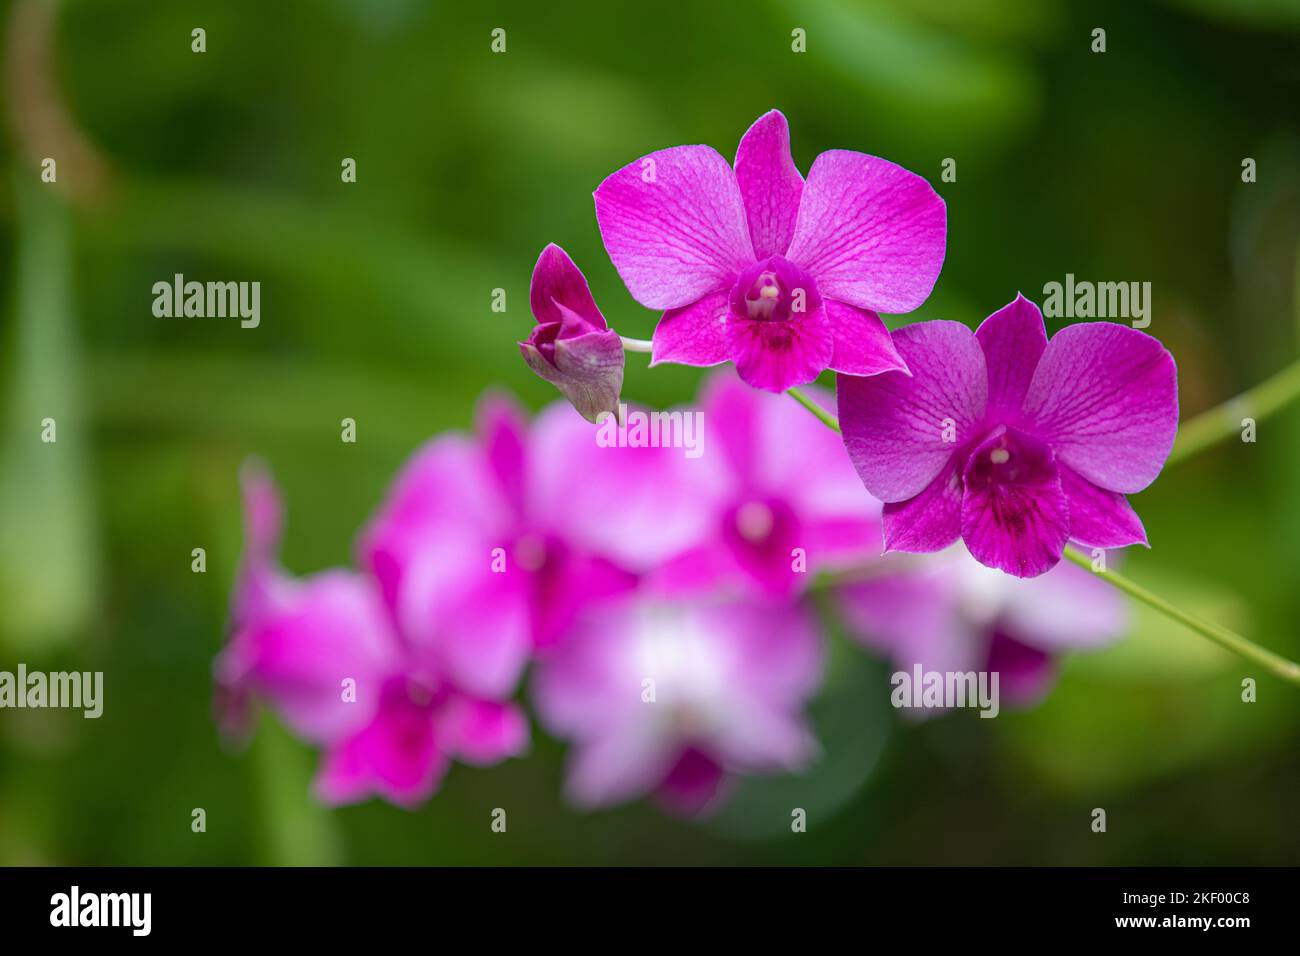 Orchid flower in tropical garden, bright pink purple floral macro with blurred green lush foliage. Dream nature closeup, romantic tropical flowers Stock Photo